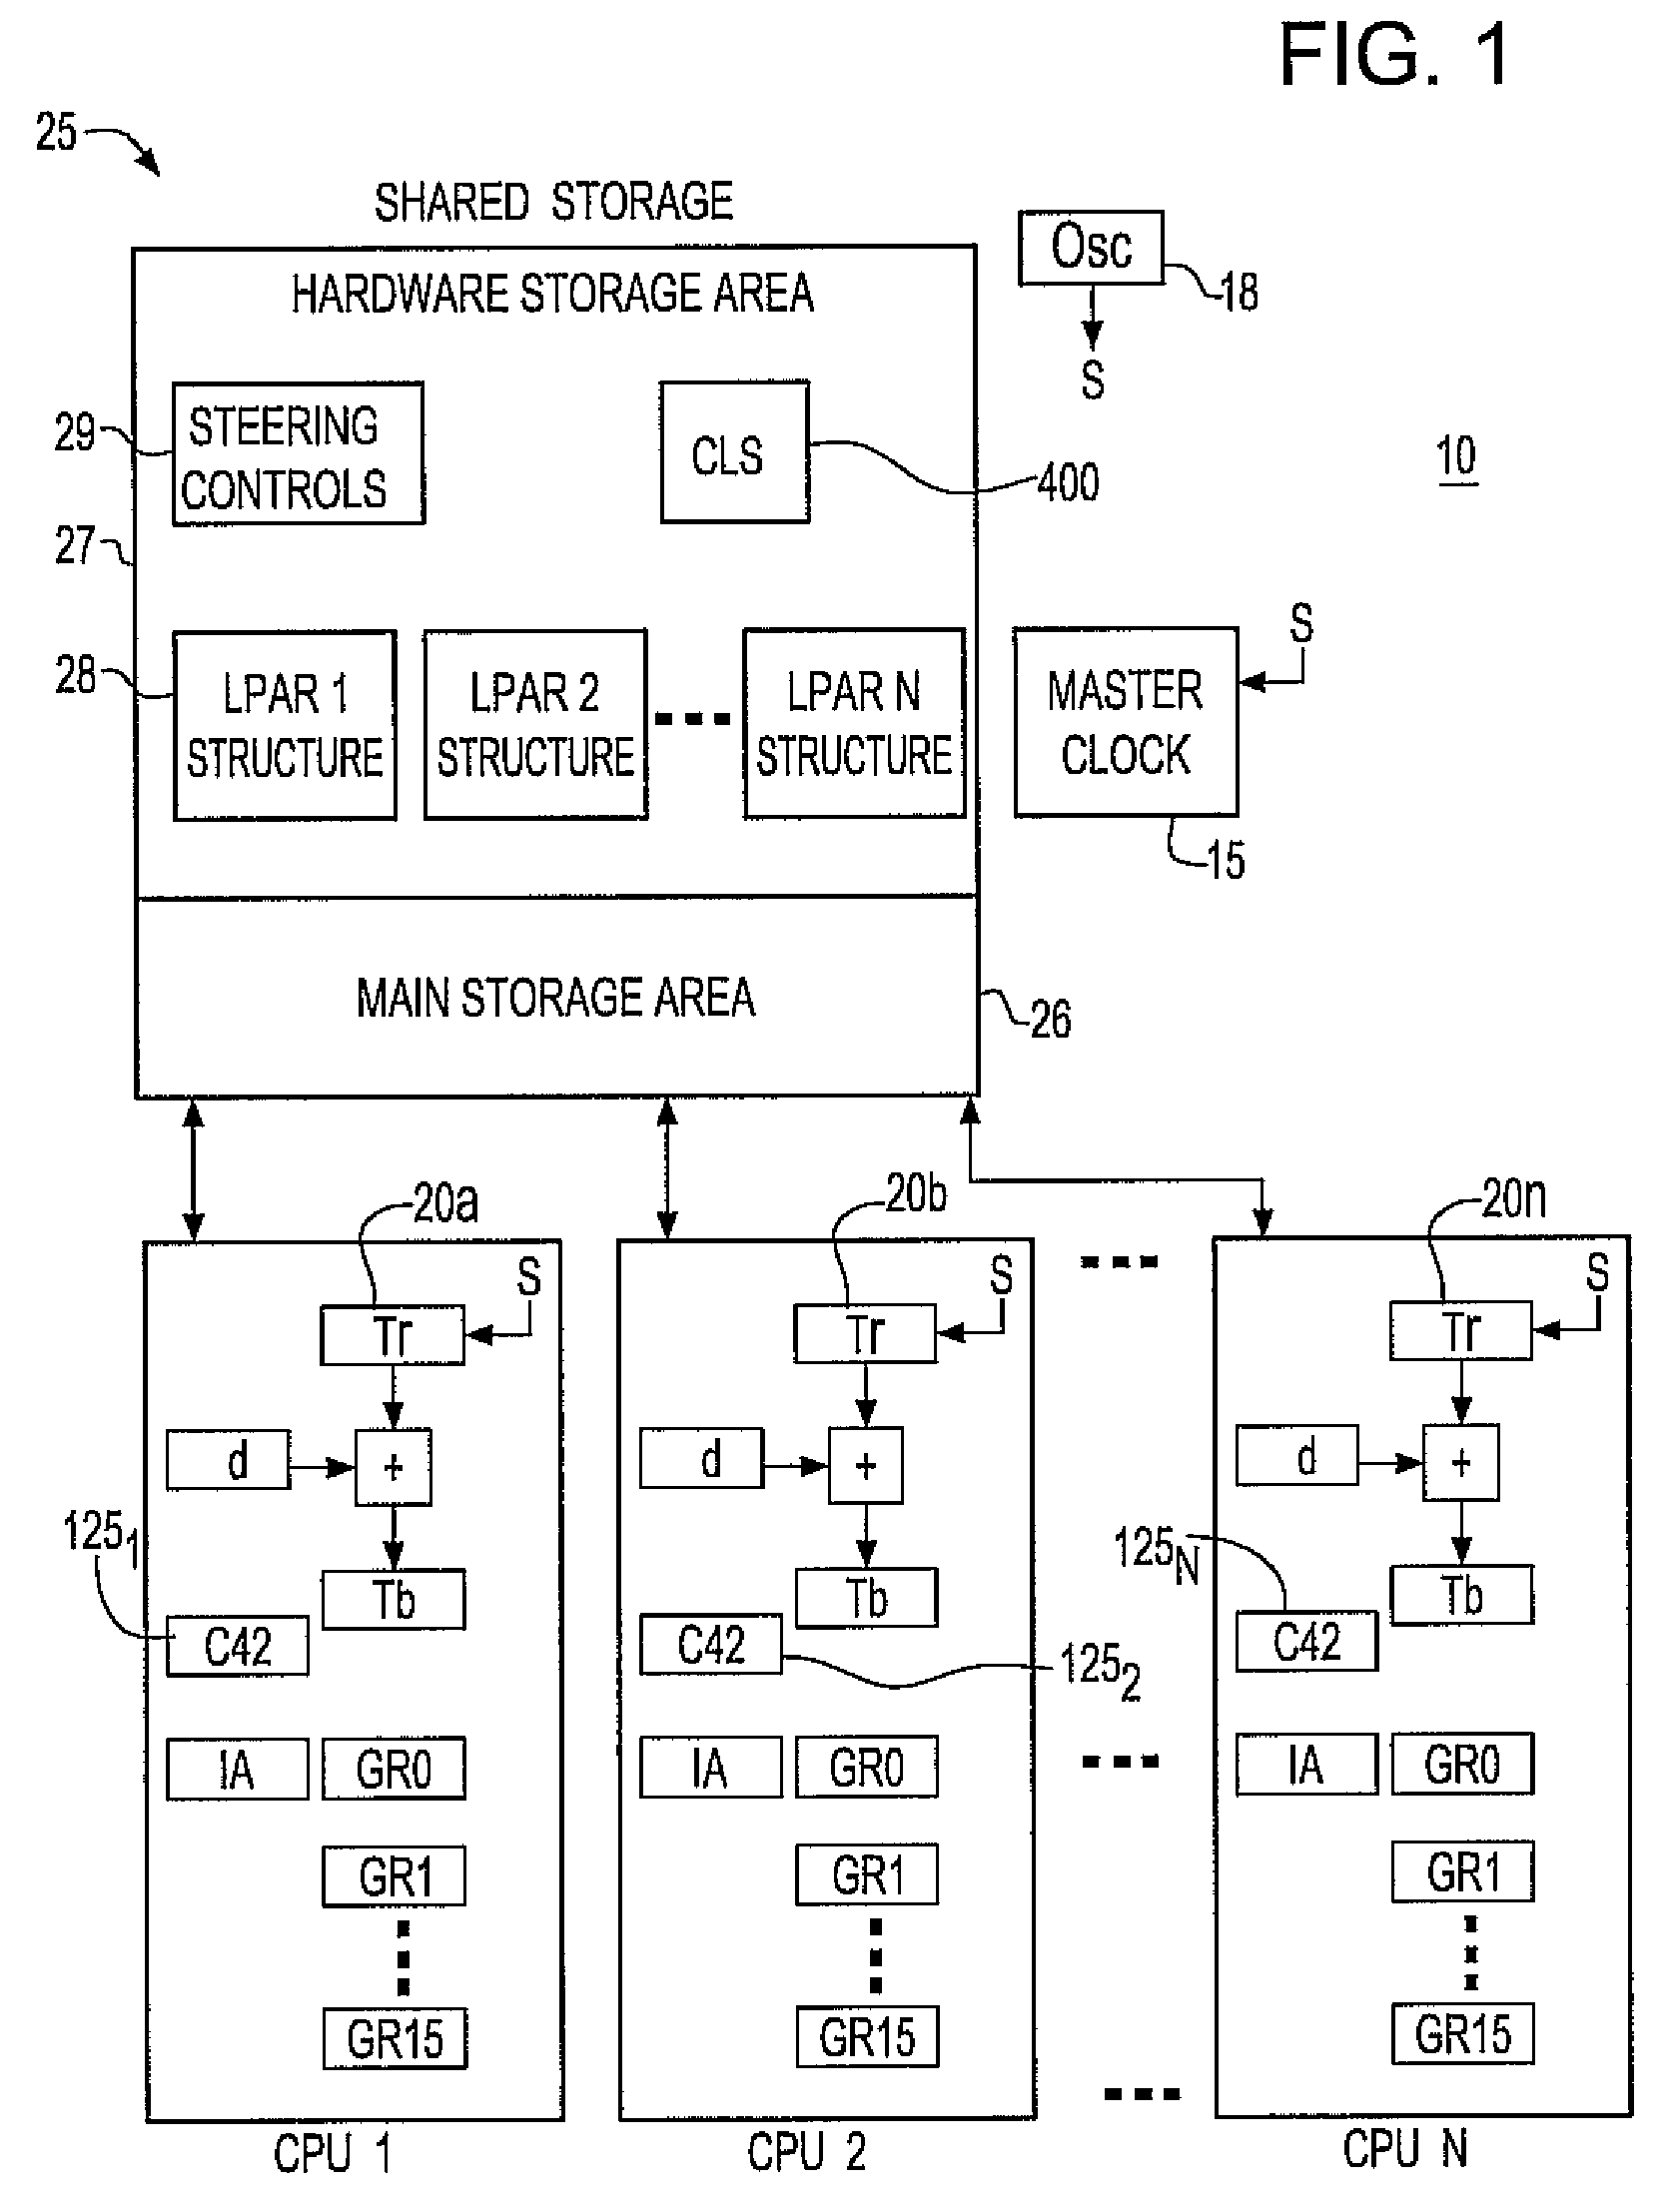 Simultaneously updating logical time of day (TOD) clocks for multiple cpus in response to detecting a carry at a pre-determined bit position of a physical clock